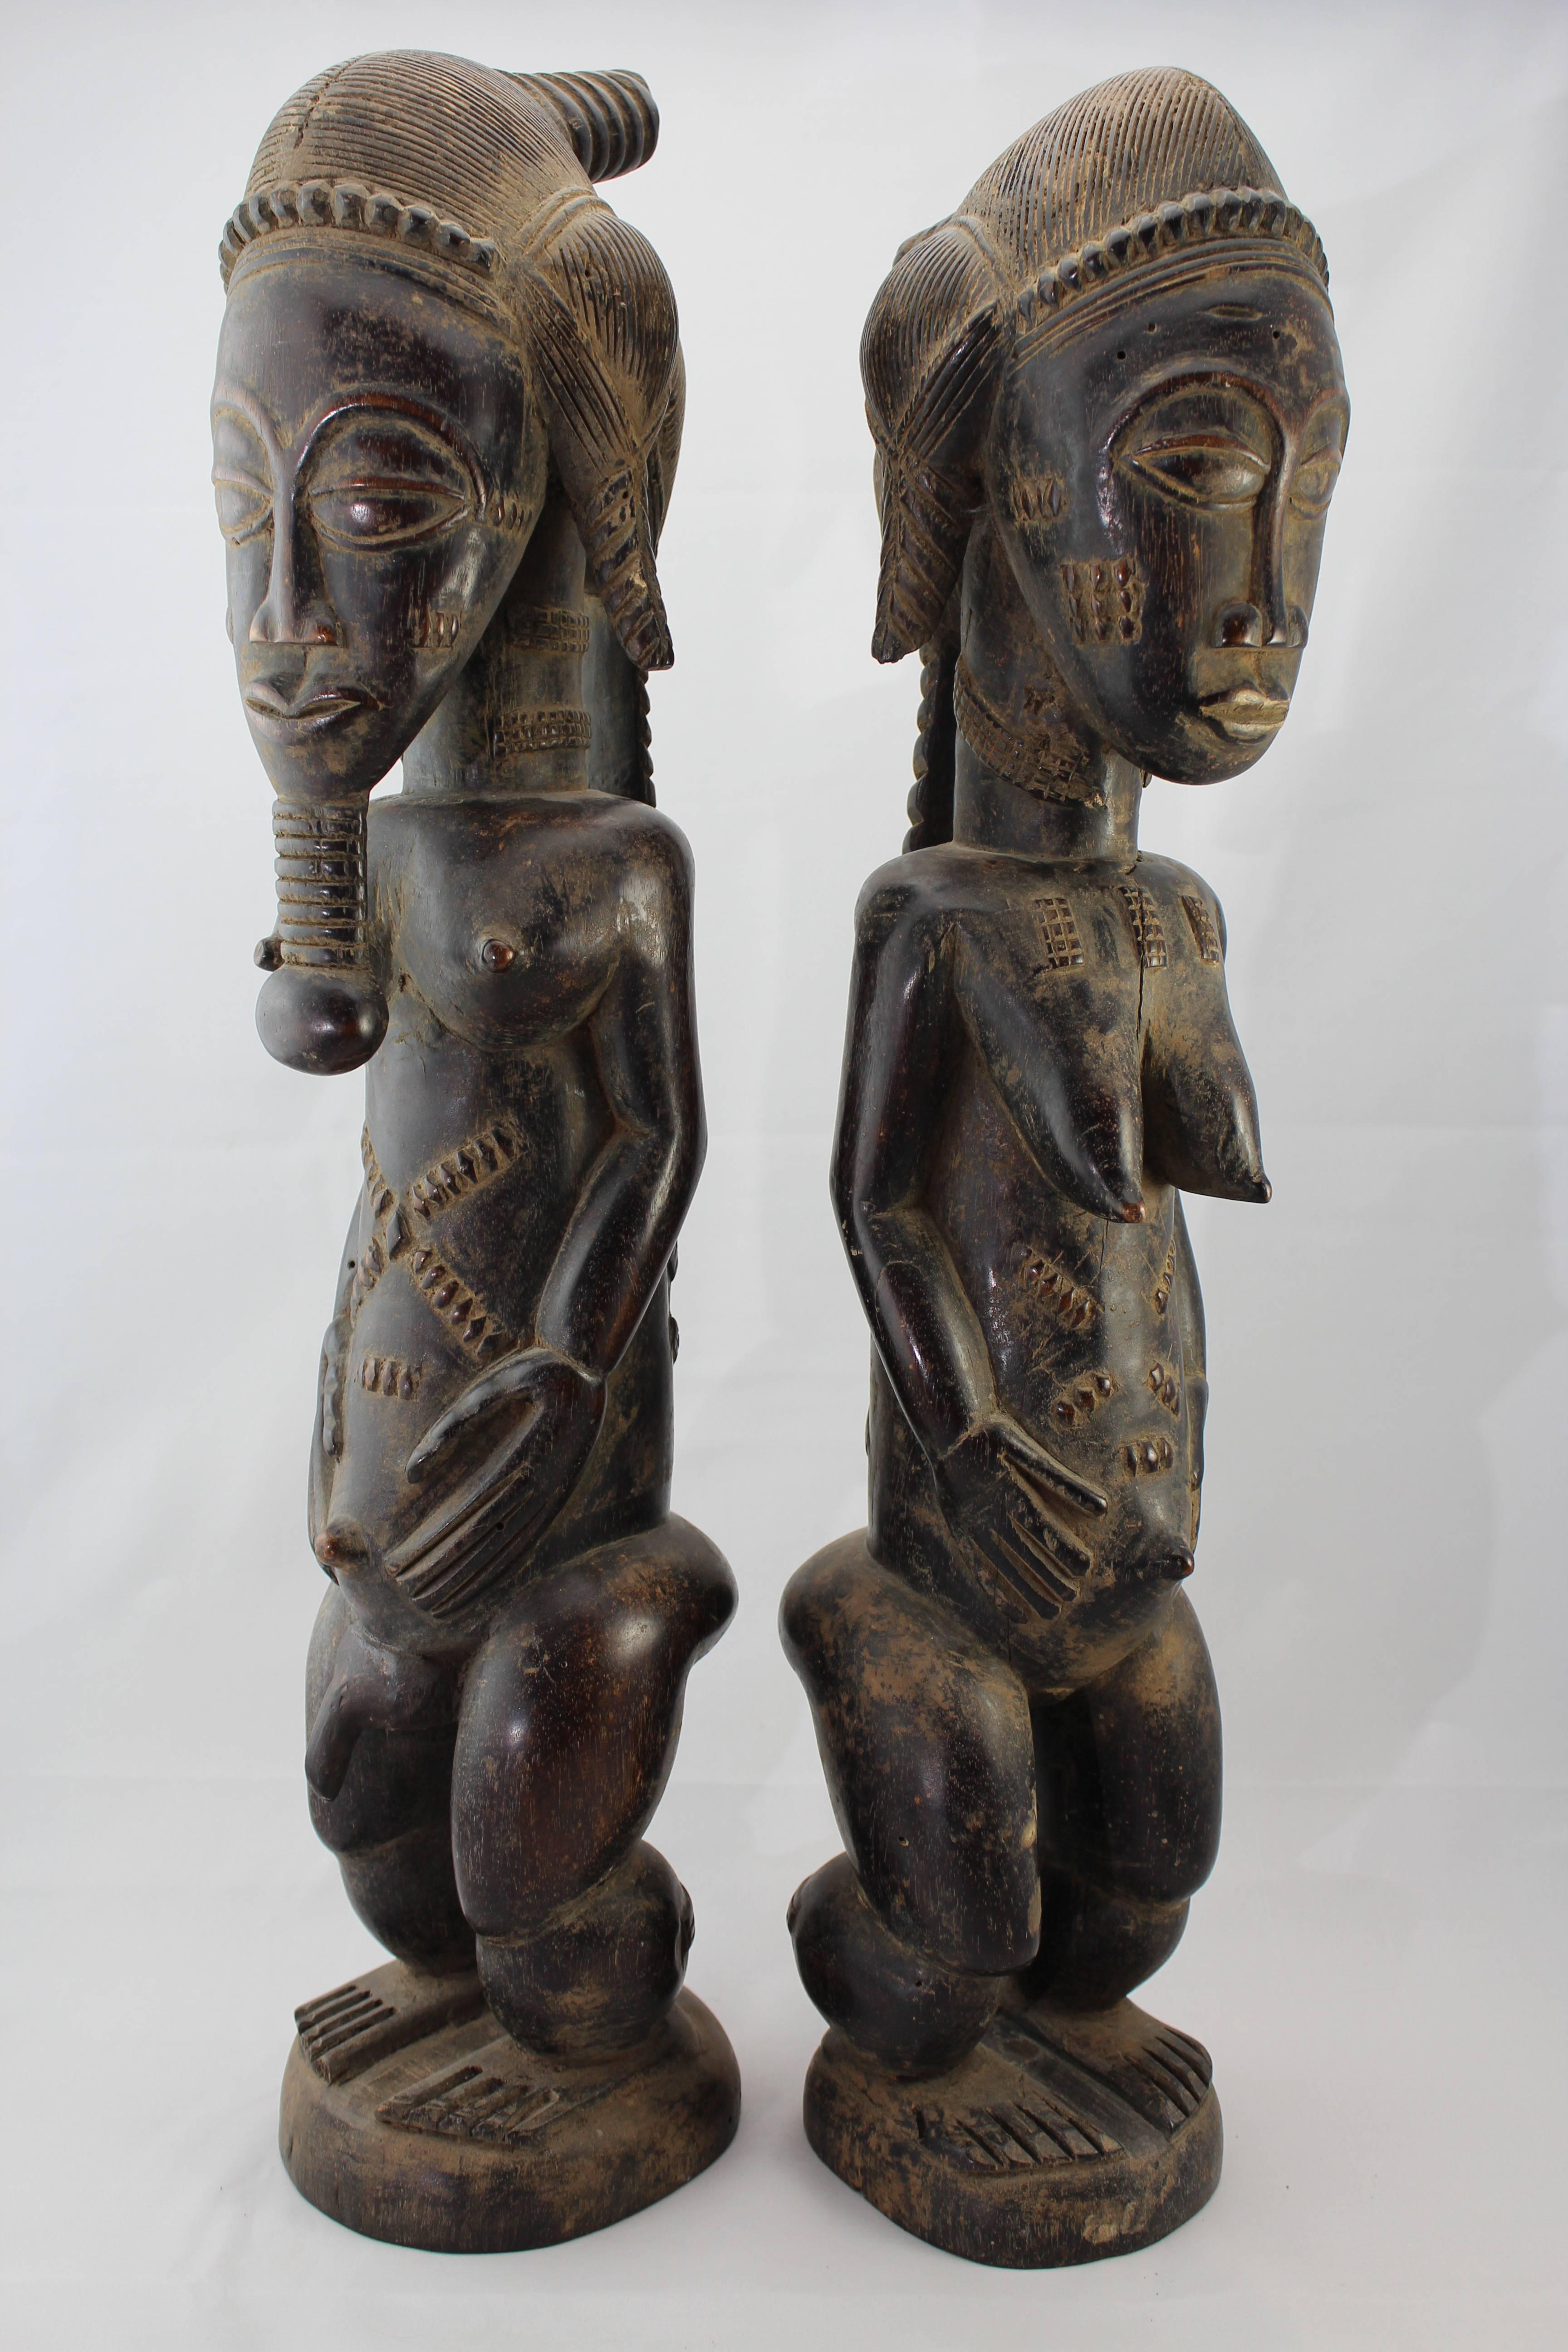 Ivorian 20th Century or Earlier Large Baule Cote D'Ivoire Male and Female Figures